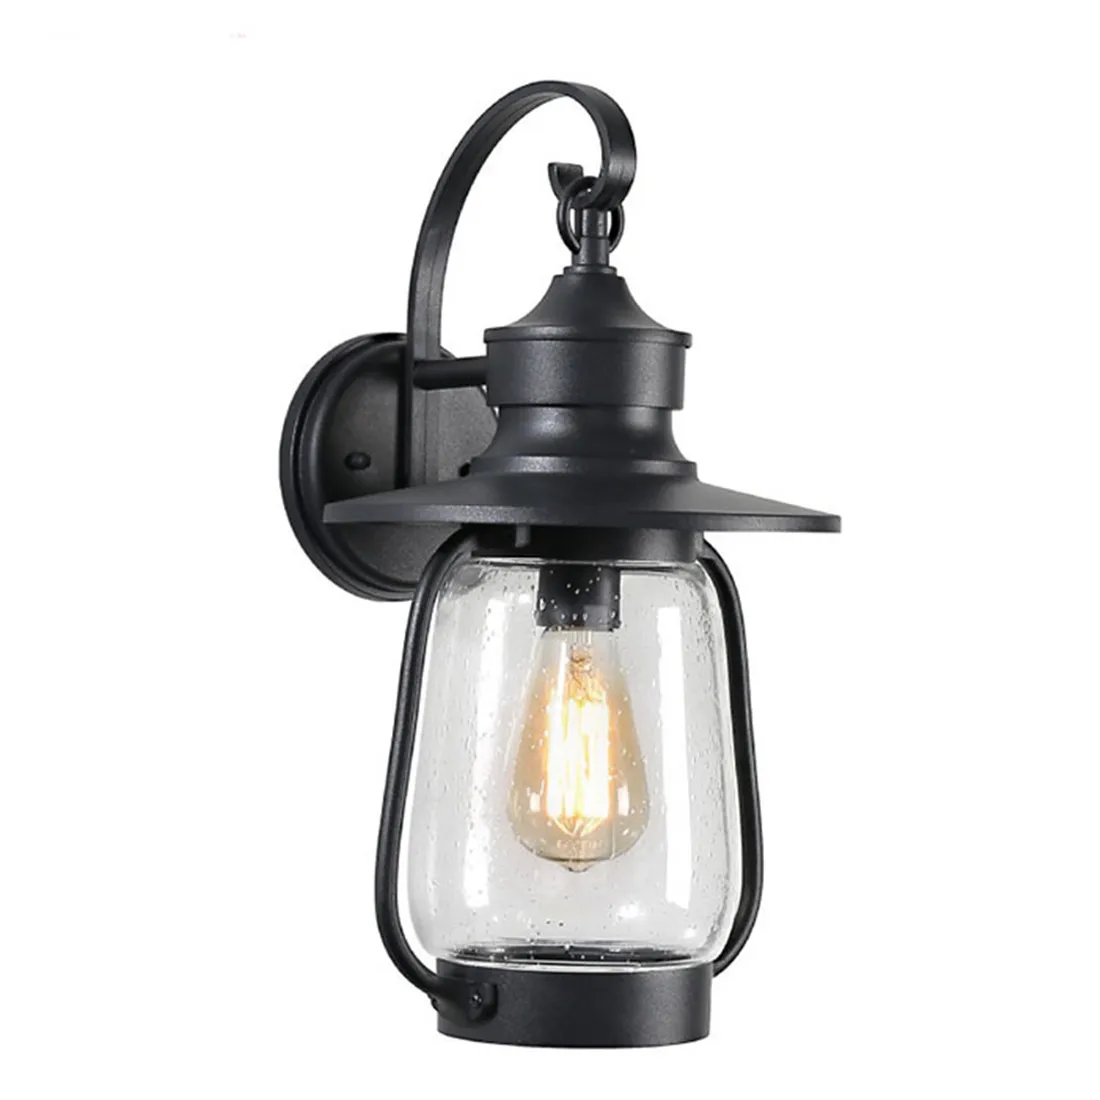 Outdoor Bubble Glass Shade Barn Lights Black Exterior Wall Lantern Outside Wall Mount Scocne Porch Lamp for House Front Door rk30 wireless wall mount cube speaker high quality class d power amplifier wireless all house mini audio speaker